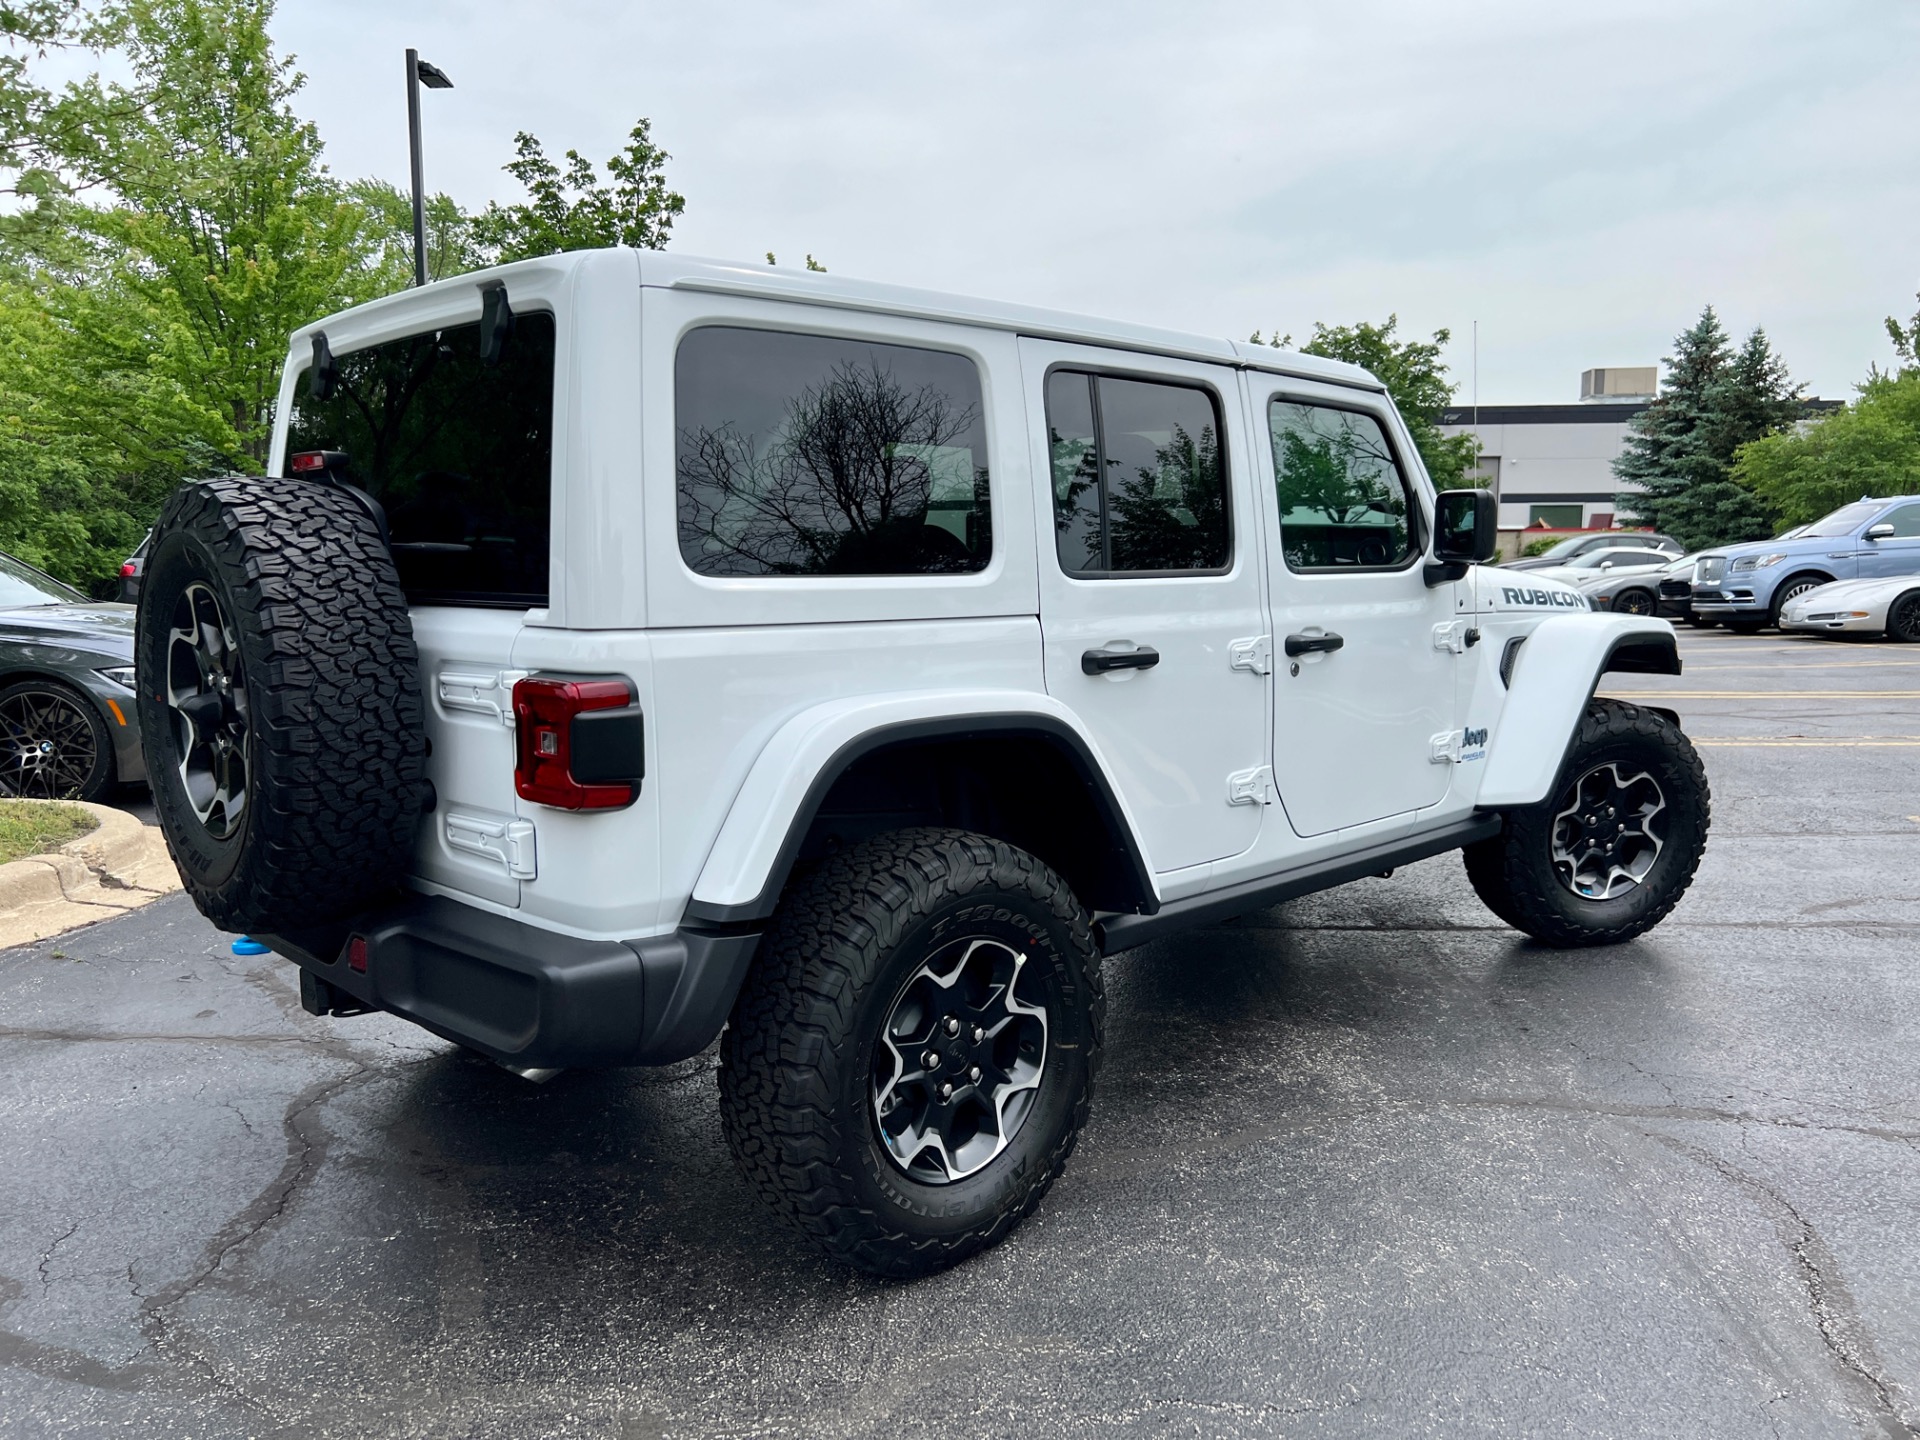 Used-2022-Jeep-Wrangler-Unlimited-Rubicon-4XE-Hybrid-SUV-LOADED-Matching-Hard-Top-Huge-MSRP-Like-New